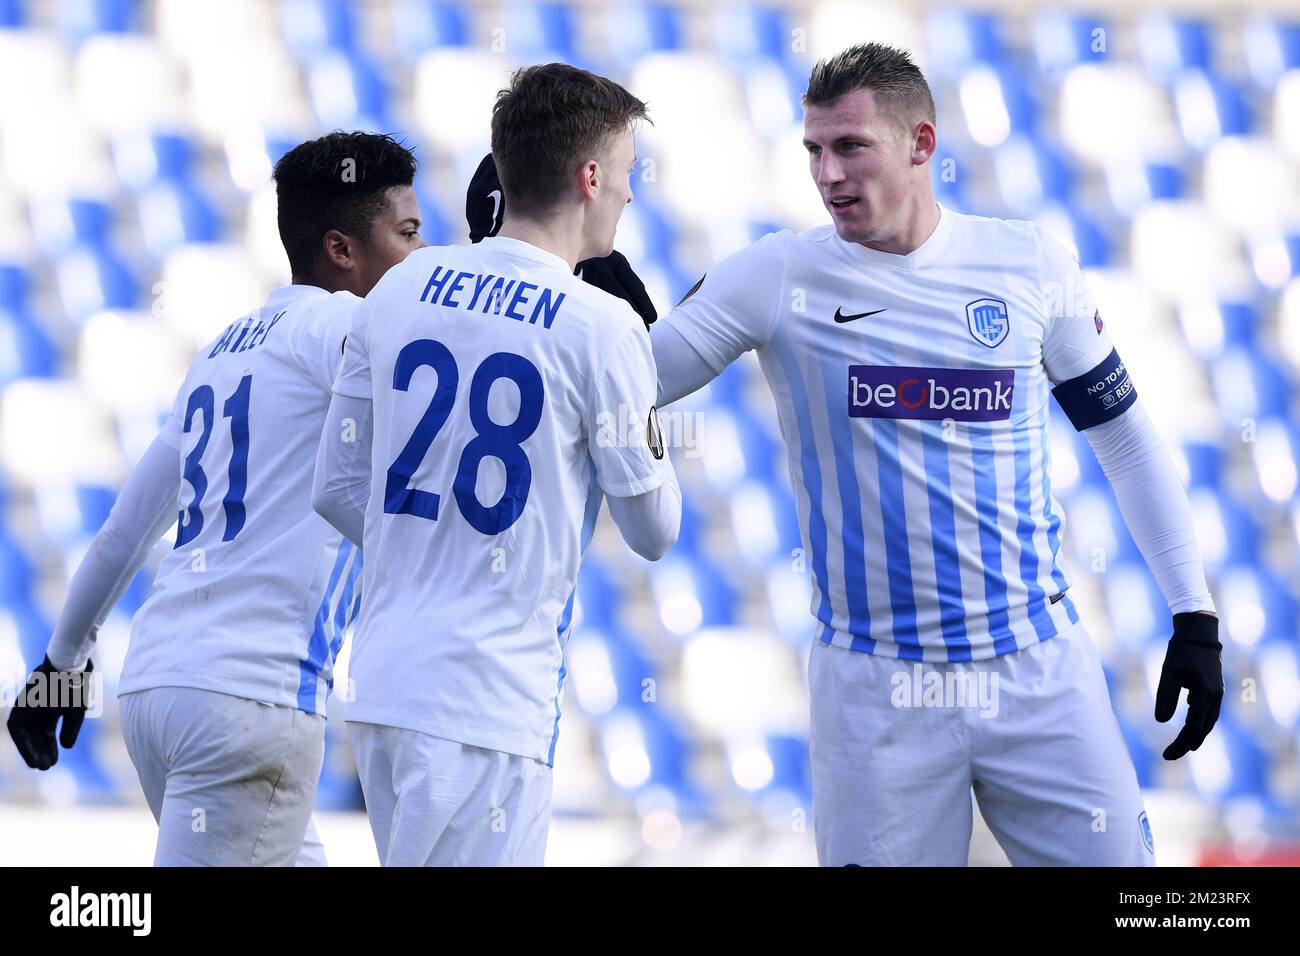 Genk's Brian Heynen and Genk's Sebastien Dewaest celebrate during a soccer game between Italian Club U.S. Sassuolo Calcio and Belgian team KRC Genk in Parma, Italy, Friday 09 December 2016, the sixth and last game of the group stage of the Europa League competition, in Group F. The match was scheduled for yesterday, but it was postponed due to heavy fog. BELGA PHOTO YORICK JANSENS Stock Photo